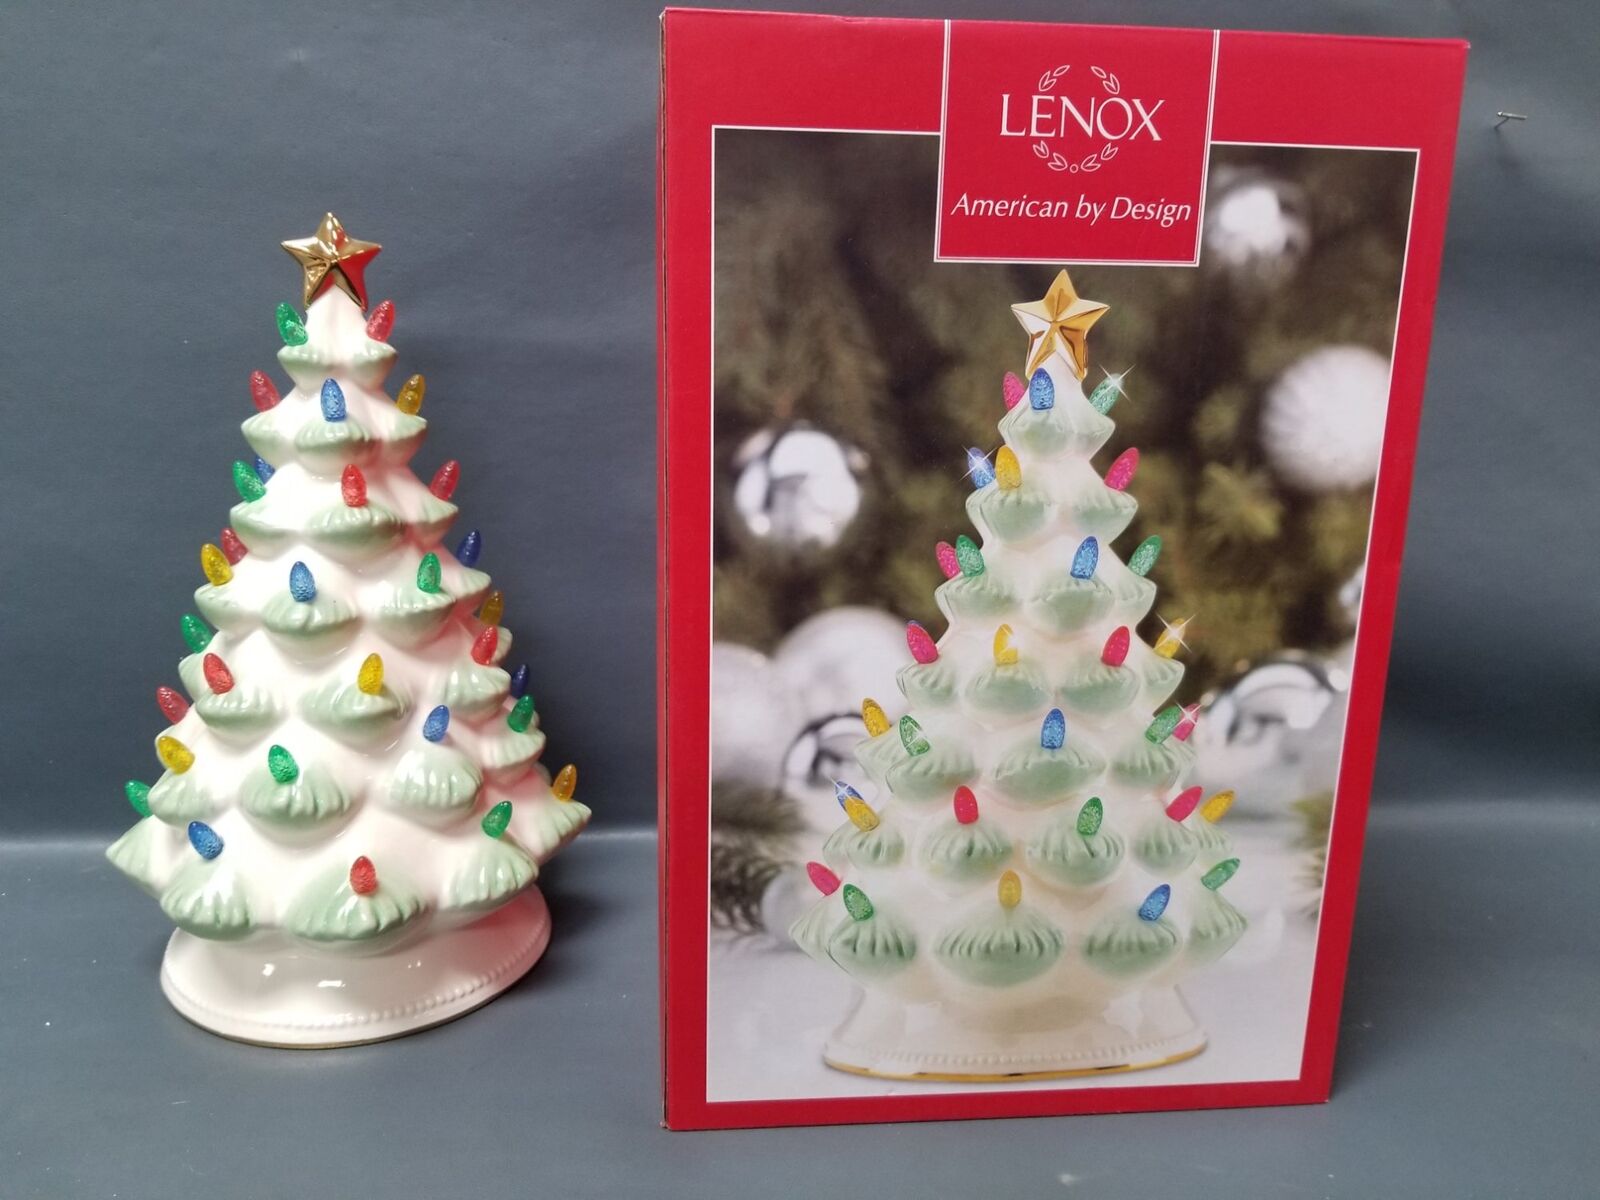 LENOX Treasured Traditions Porcelain Light Up Christmas Tree in Box - Tested